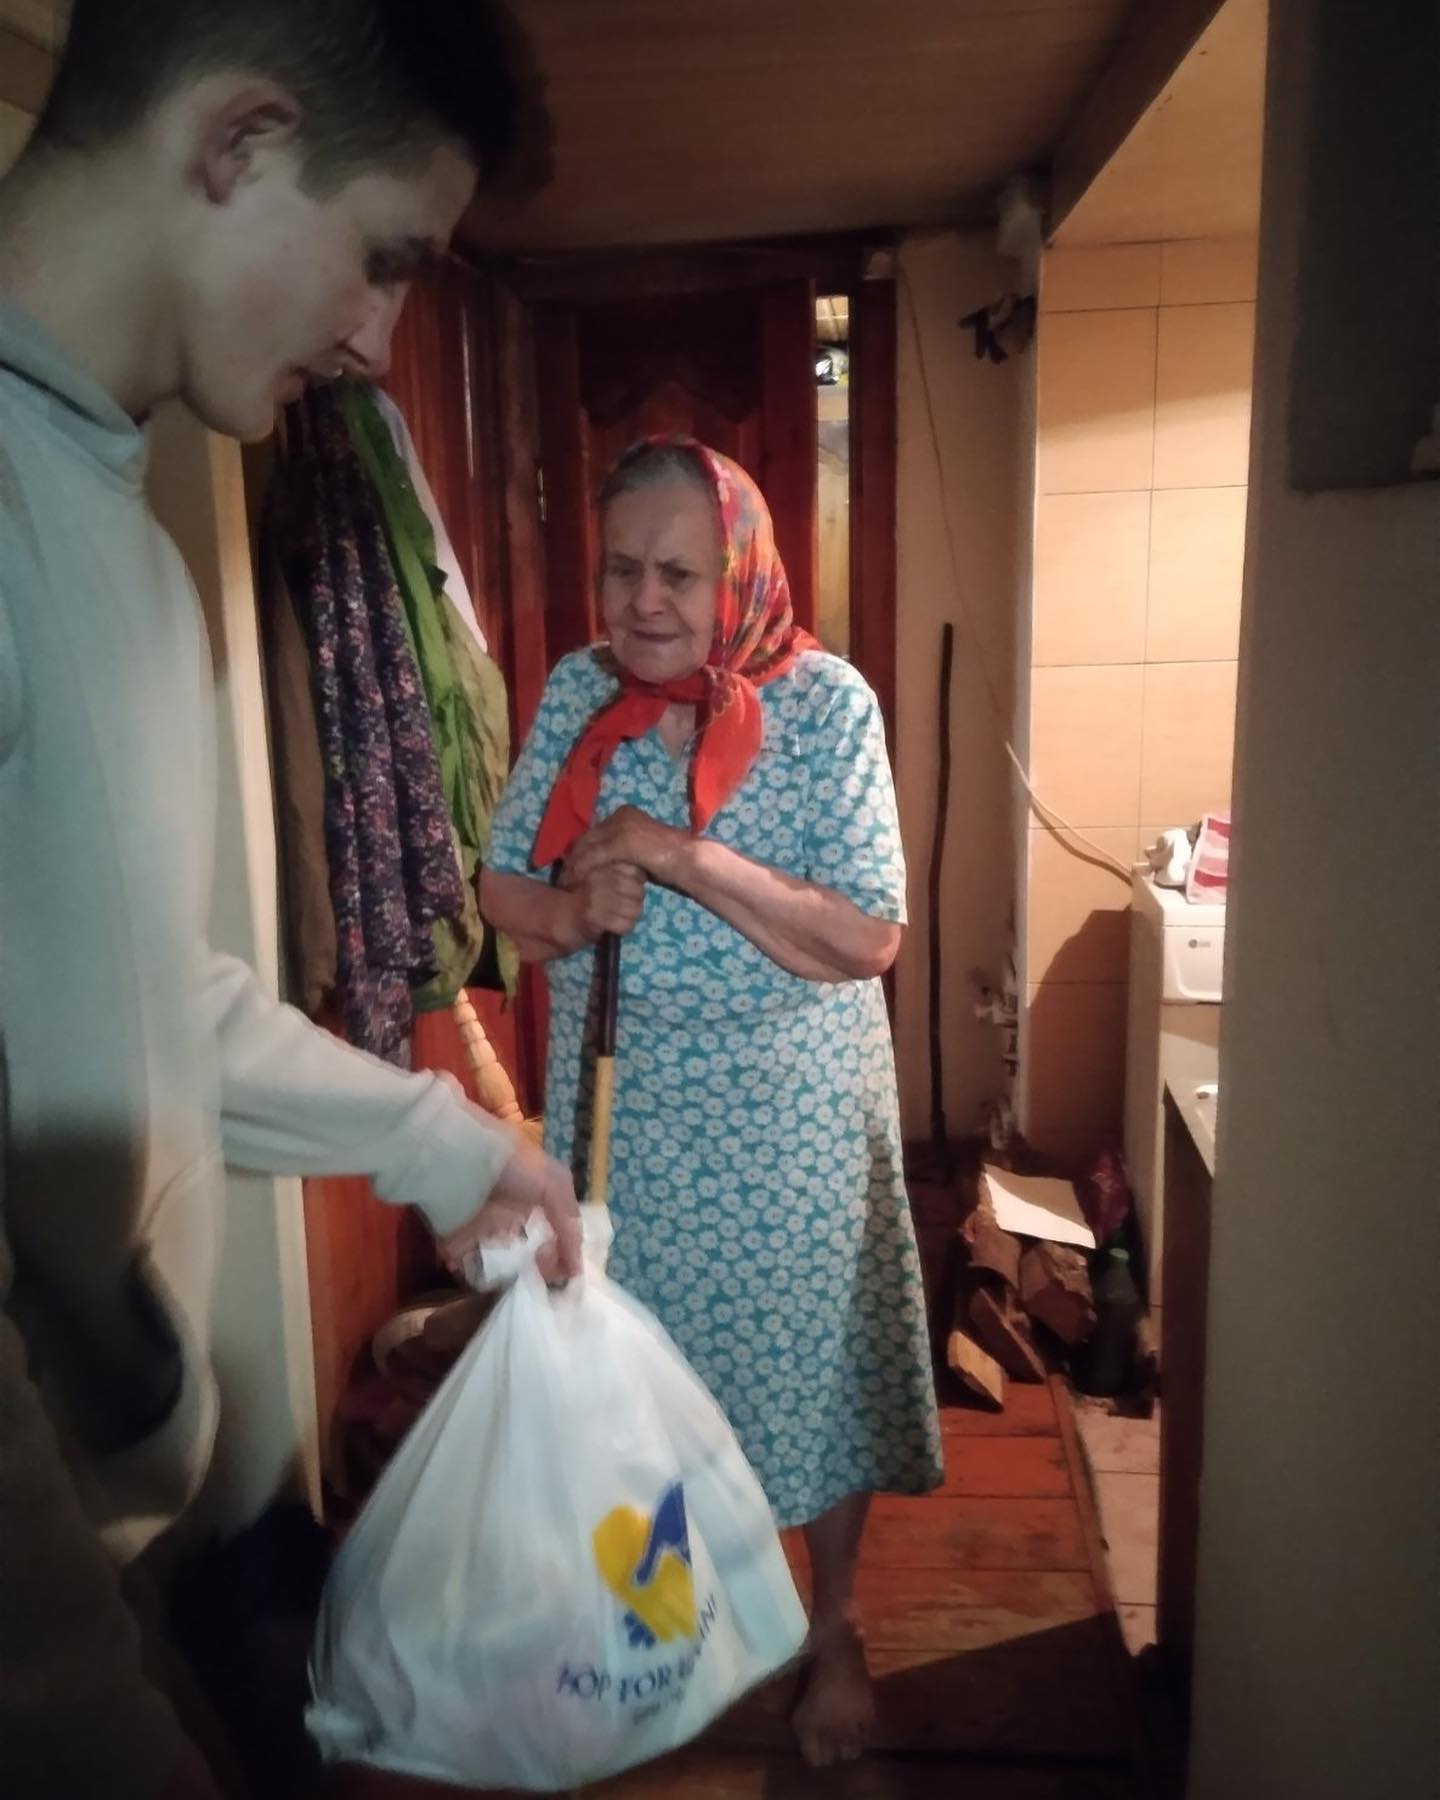 A man and a woman standing in a kitchen with a bag.